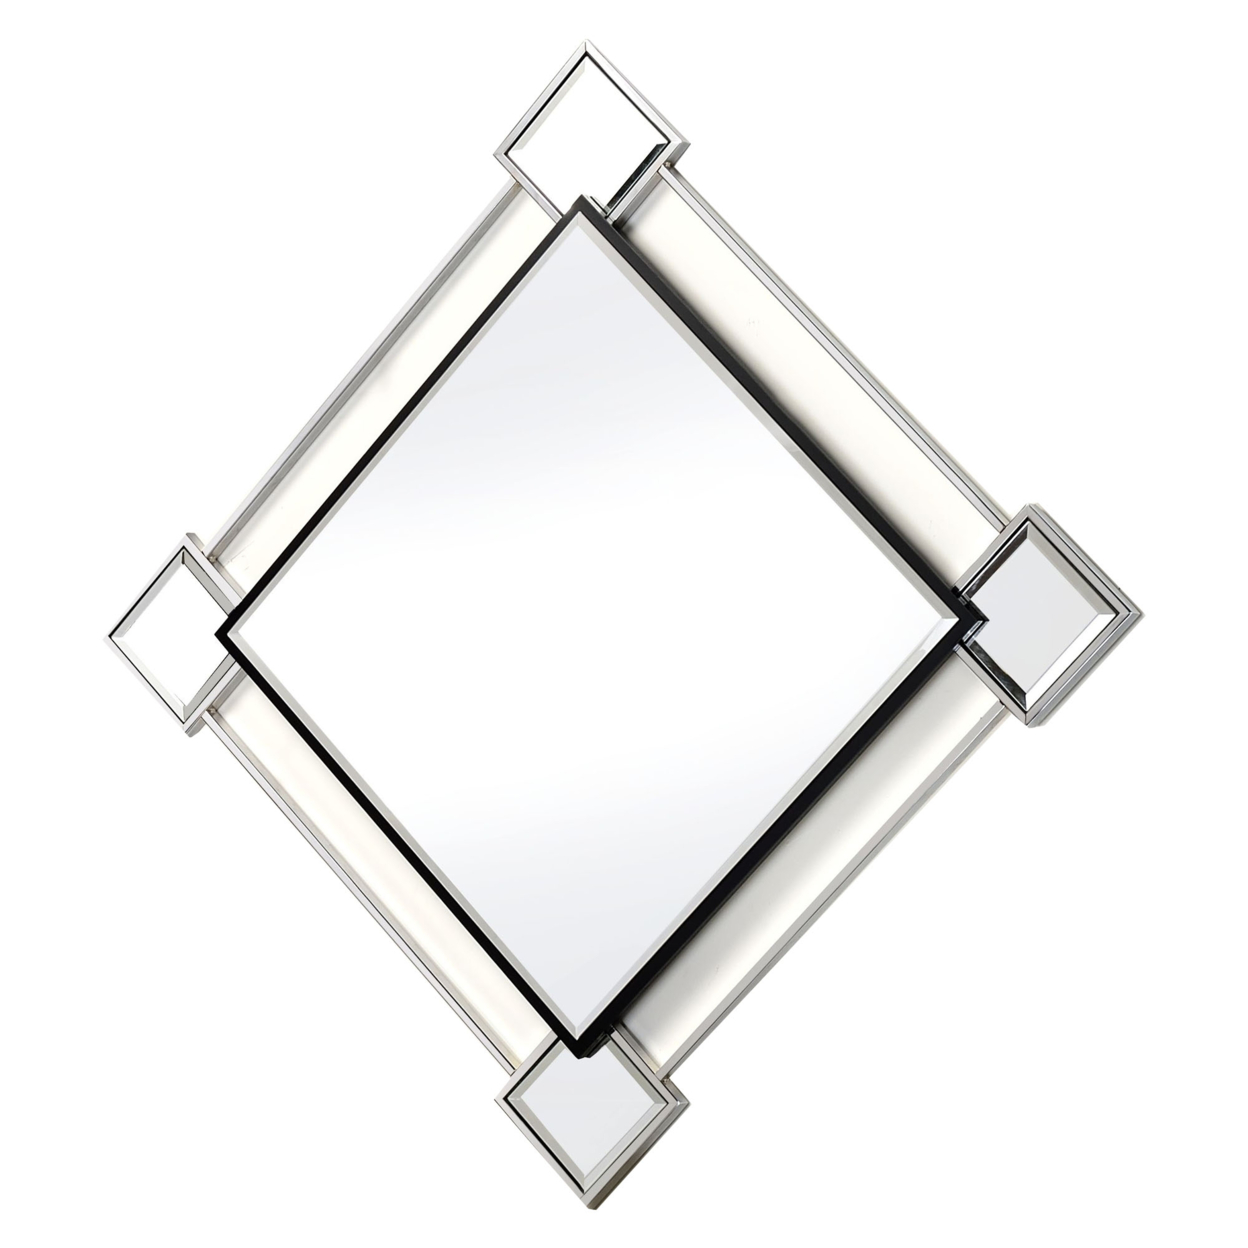 Diamond Shaped Beveled Accent Wall Mirror With Mirror Inserts, Silver- Saltoro Sherpi